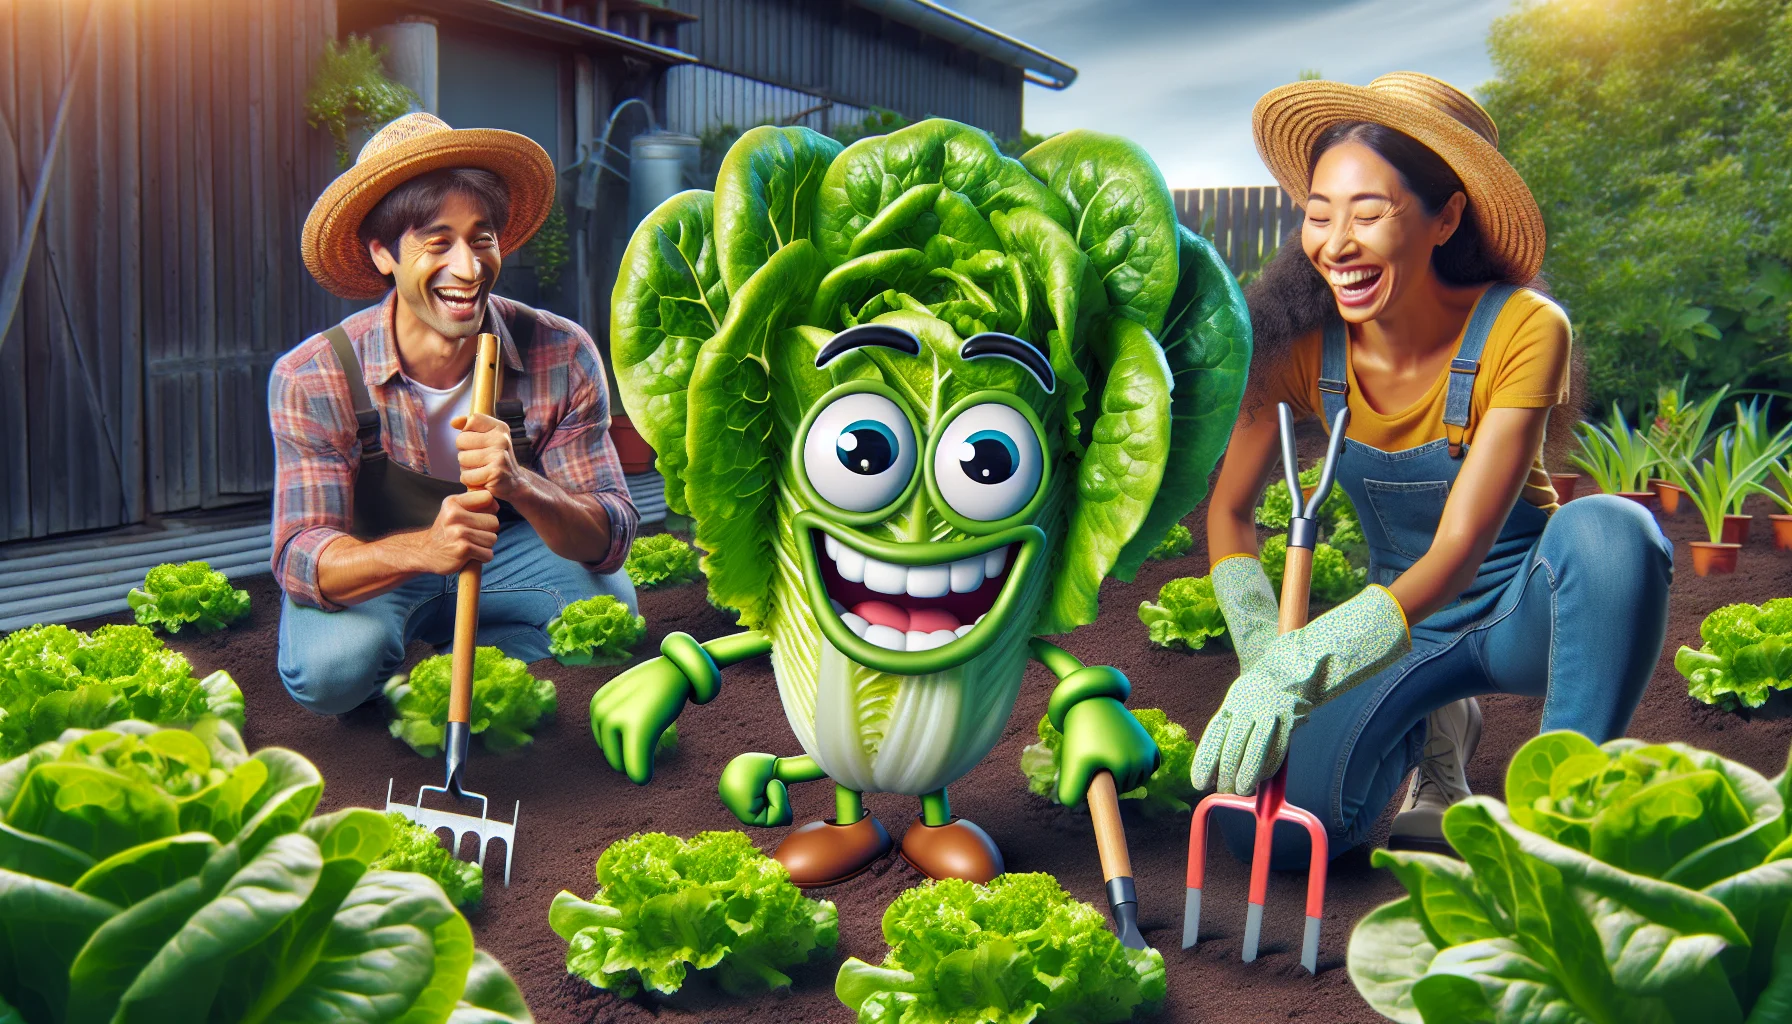 A captivating image showing the lighter side of gardening. In the center is a vibrant, lush, and growing lettuce with oversized leaves. The lettuce has cartoonish eyes and a broad smile, and it's holding a tiny rake, giving the humorous impression that it's helping in the cultivation of its own kind. Surrounding the animated lettuce are several other regular-sized, healthy lettuce plants. A South Asian man on the left and a Hispanic woman on the right, both wearing sun hats and gardening gloves, are laughing joyfully as they witness the amusing spectacle. This image serves as an enticing depiction of the joys of gardening.